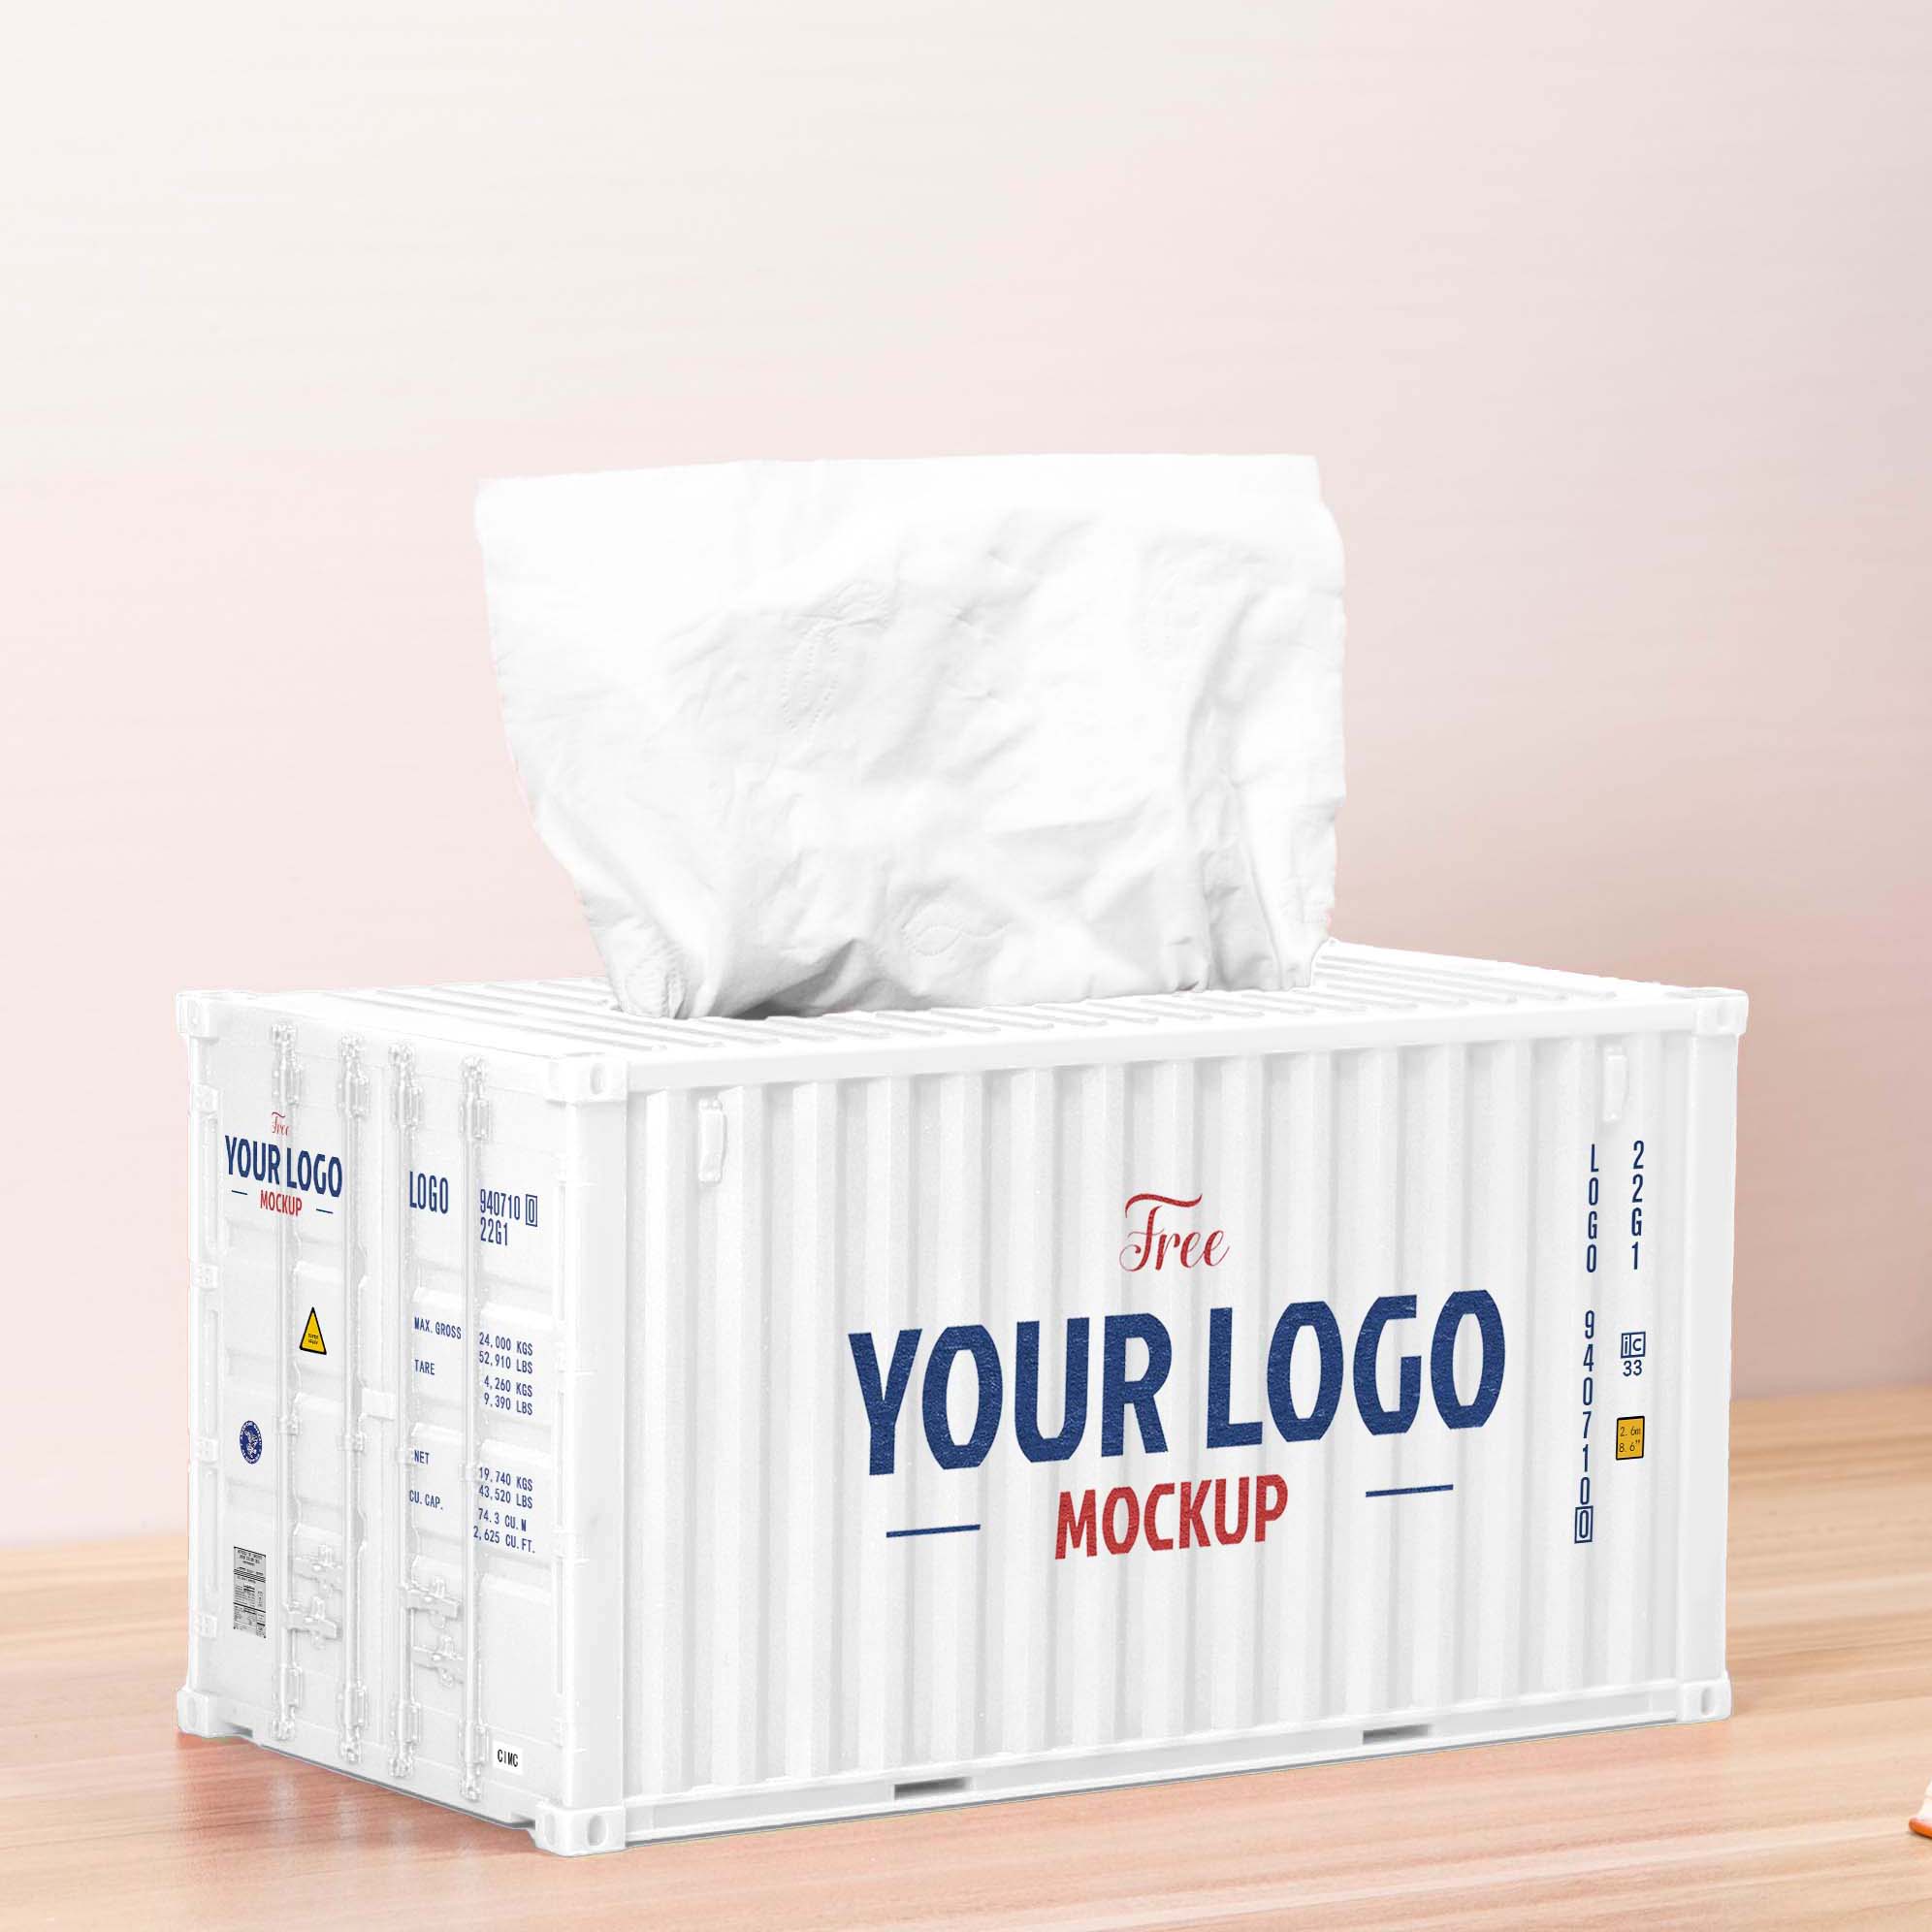 Shipping Container Pencil Holder&Tissue Box – Banboring